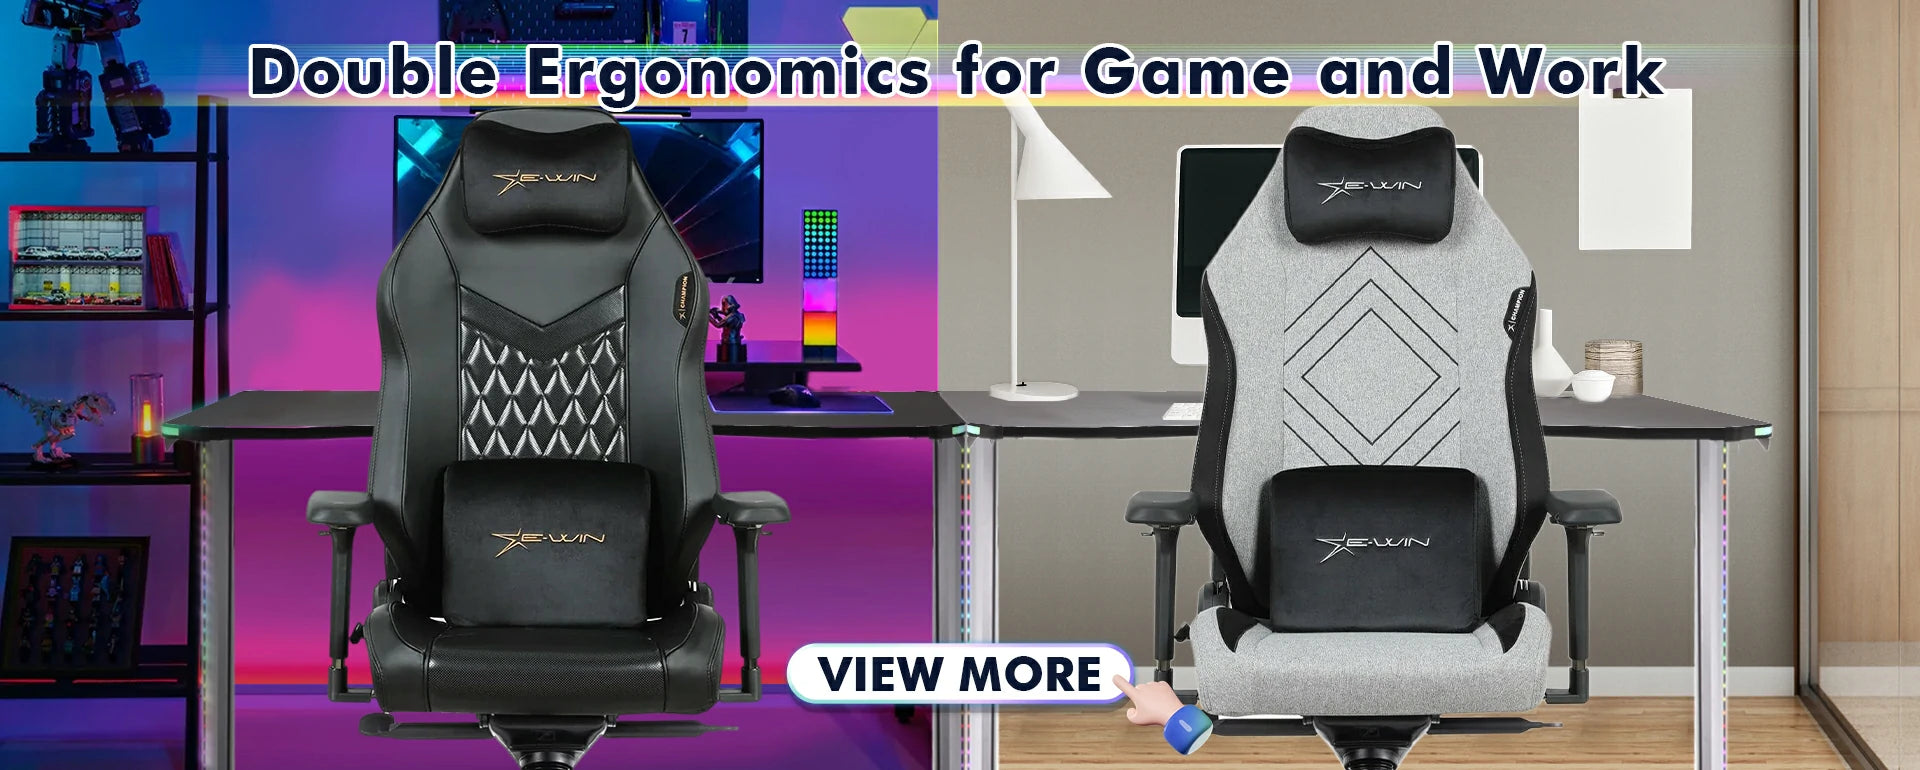 E-WIN RGB Gaming Desk and Revolutionary Upgrade chair